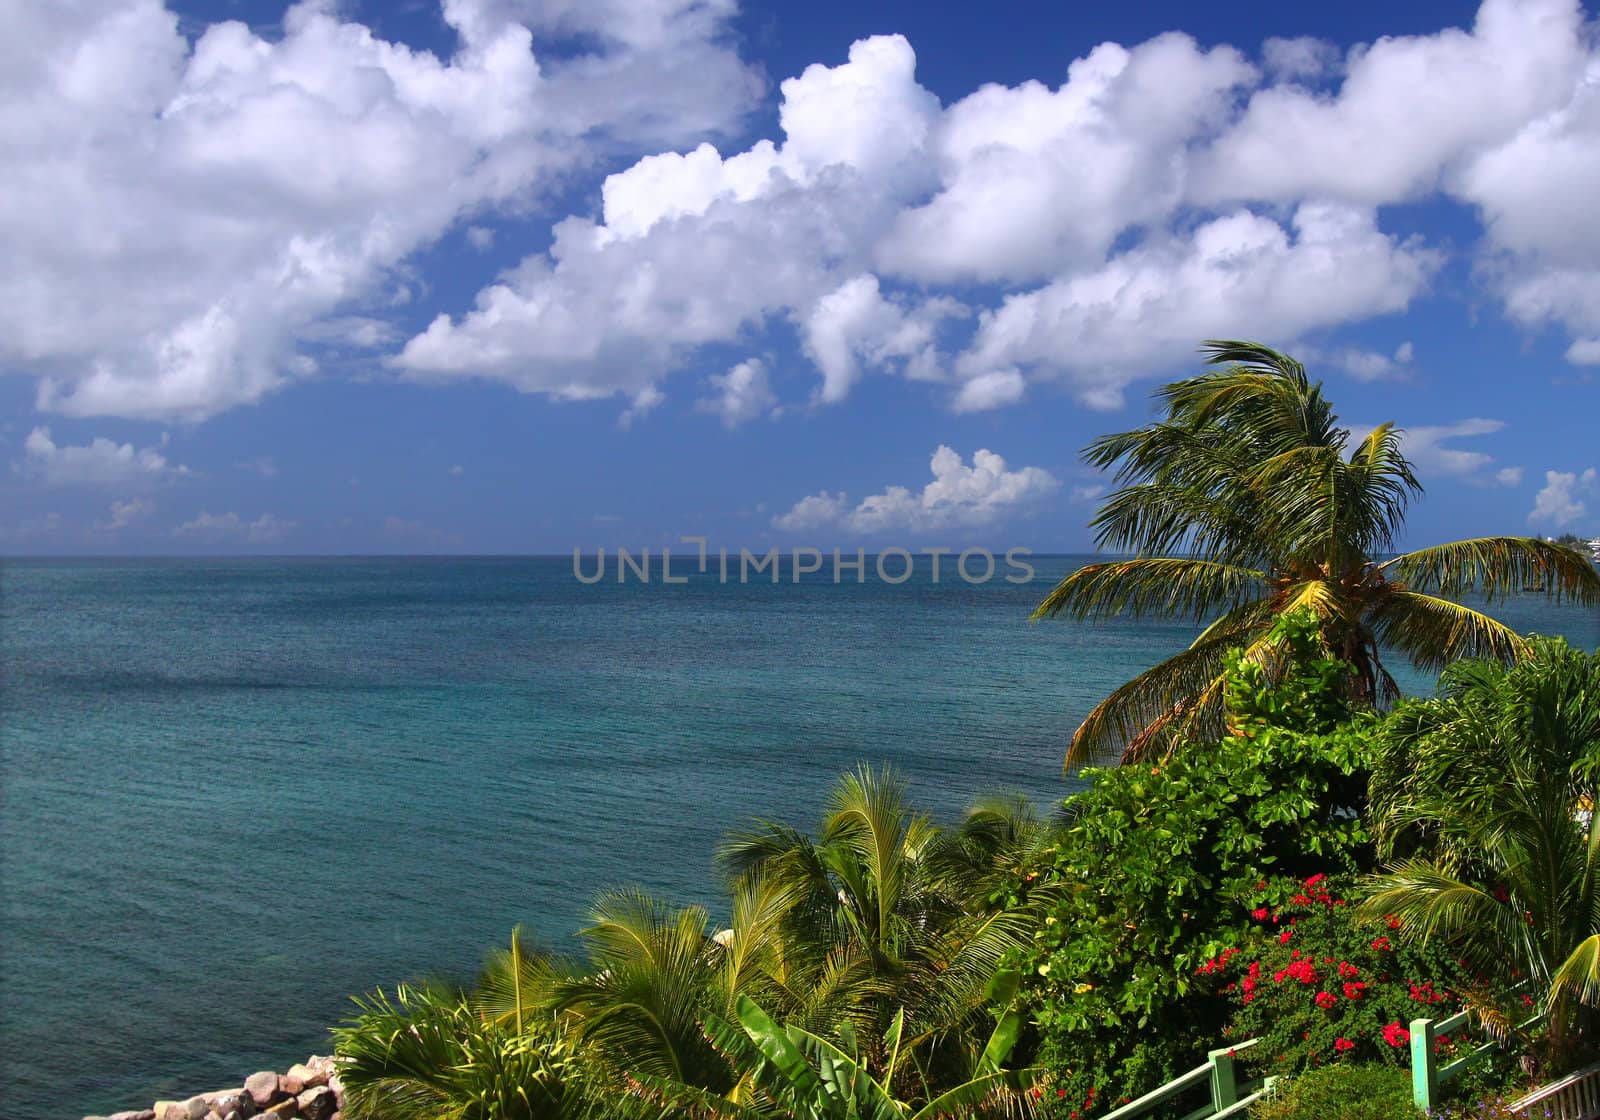 The Caribbean island of Saint Kitts by Wirepec